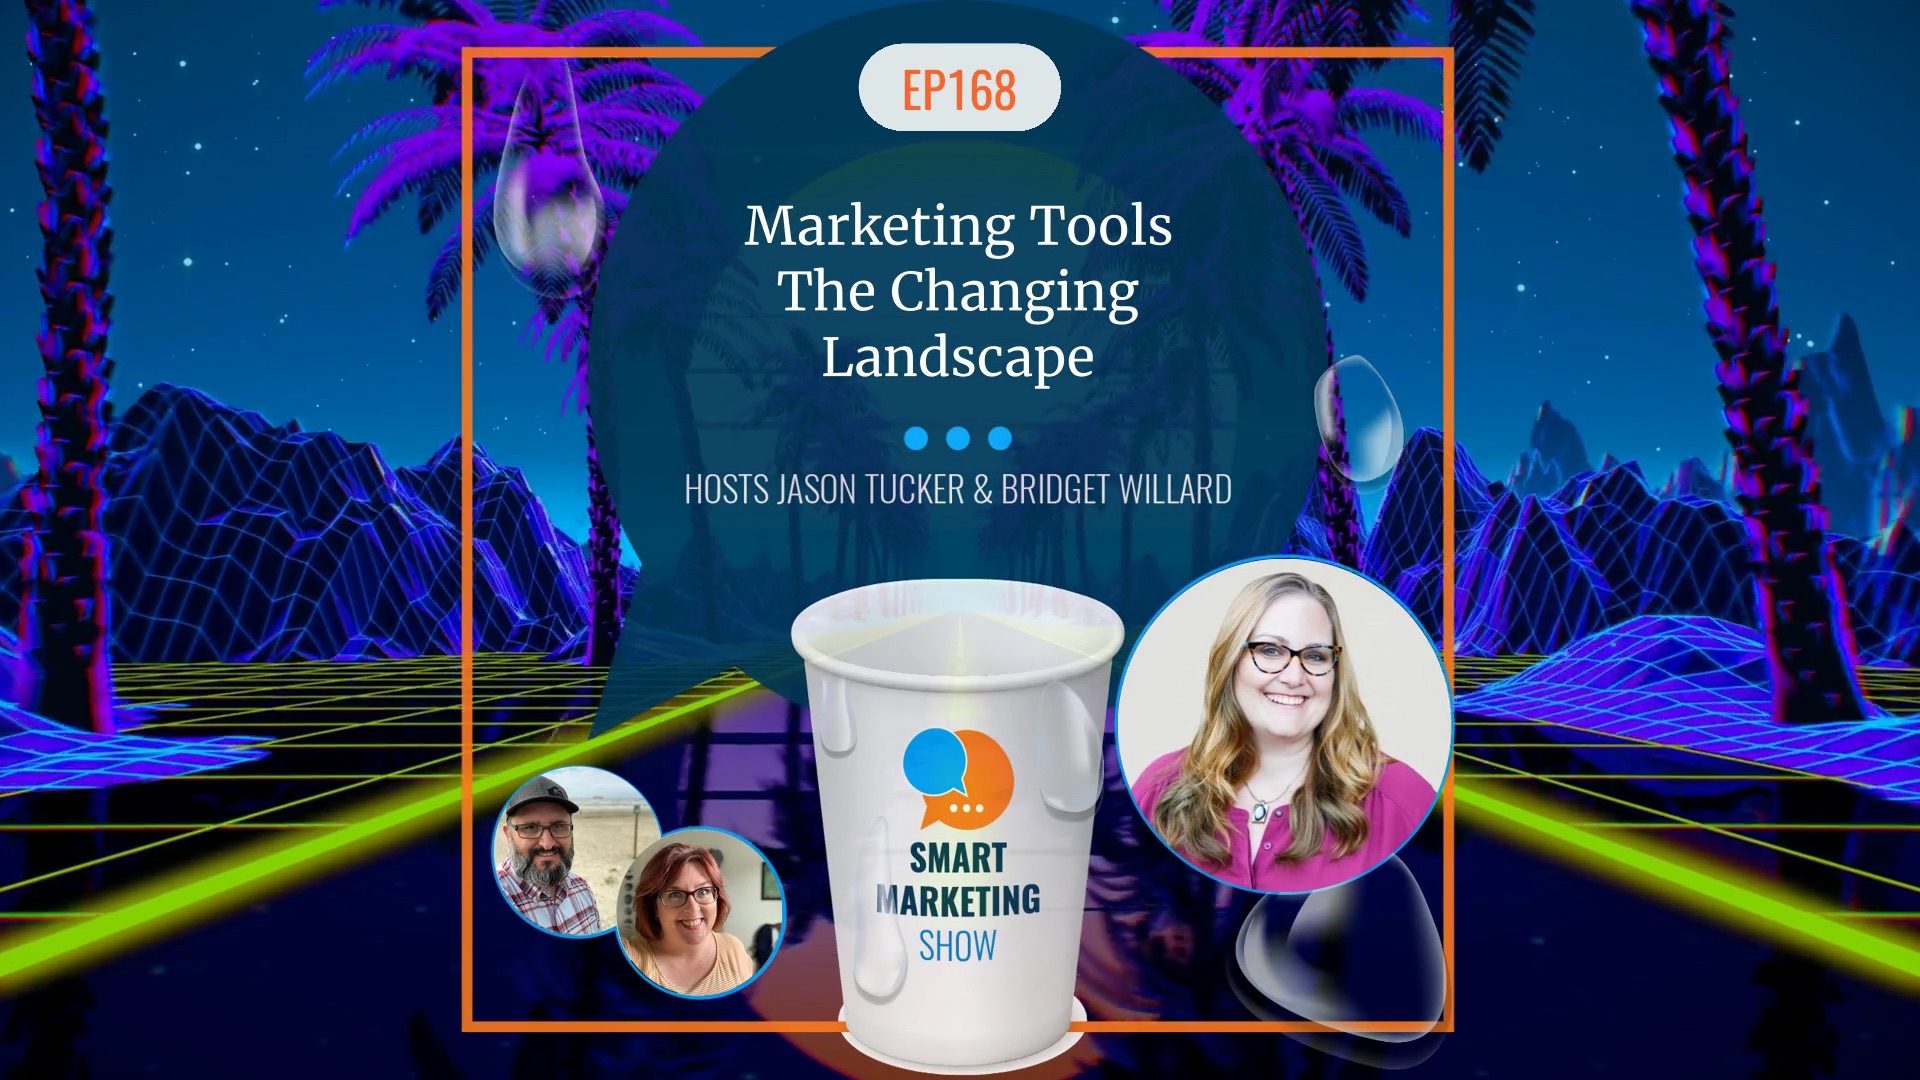 EP168 Marketing Tools The Changing Landscape intro